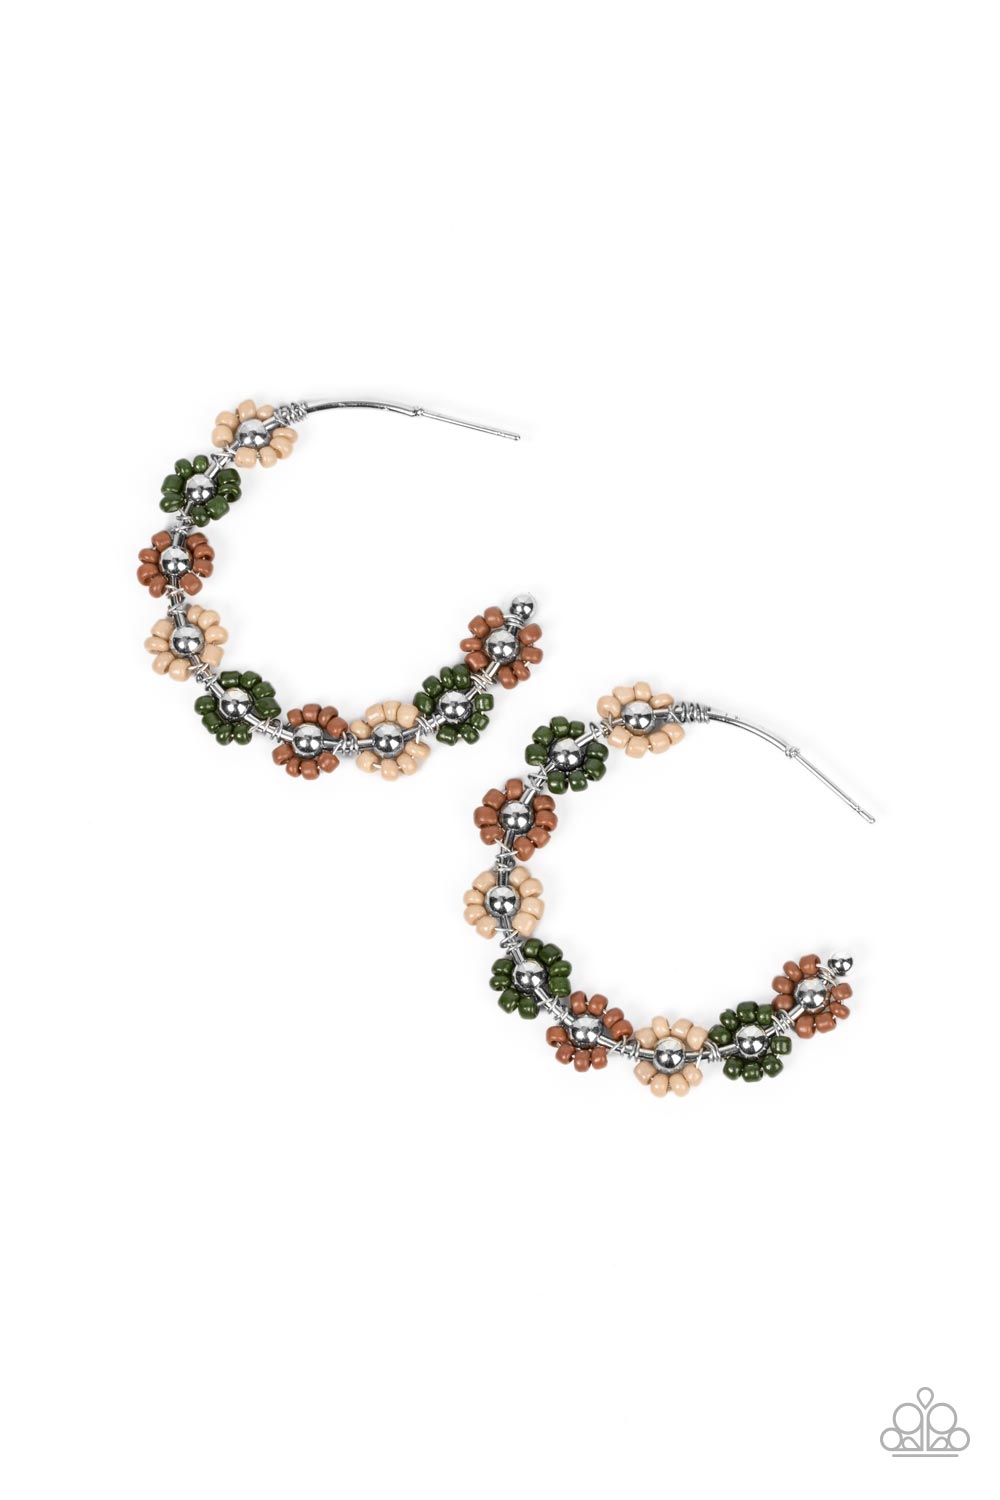 Paparazzi Accessories - Growth Spurt - Green Hoop Earrings adorned with shiny silver beaded centers, a dainty collection of taupe, brown, and Olive Branch seed beaded rings create earthy flower accents along a classic silver hoop for a grounding floral display. Earring attaches to a standard post fitting. Hoop measures approximately 1 1/2" in diameter.  Sold as one pair of hoop earrings.